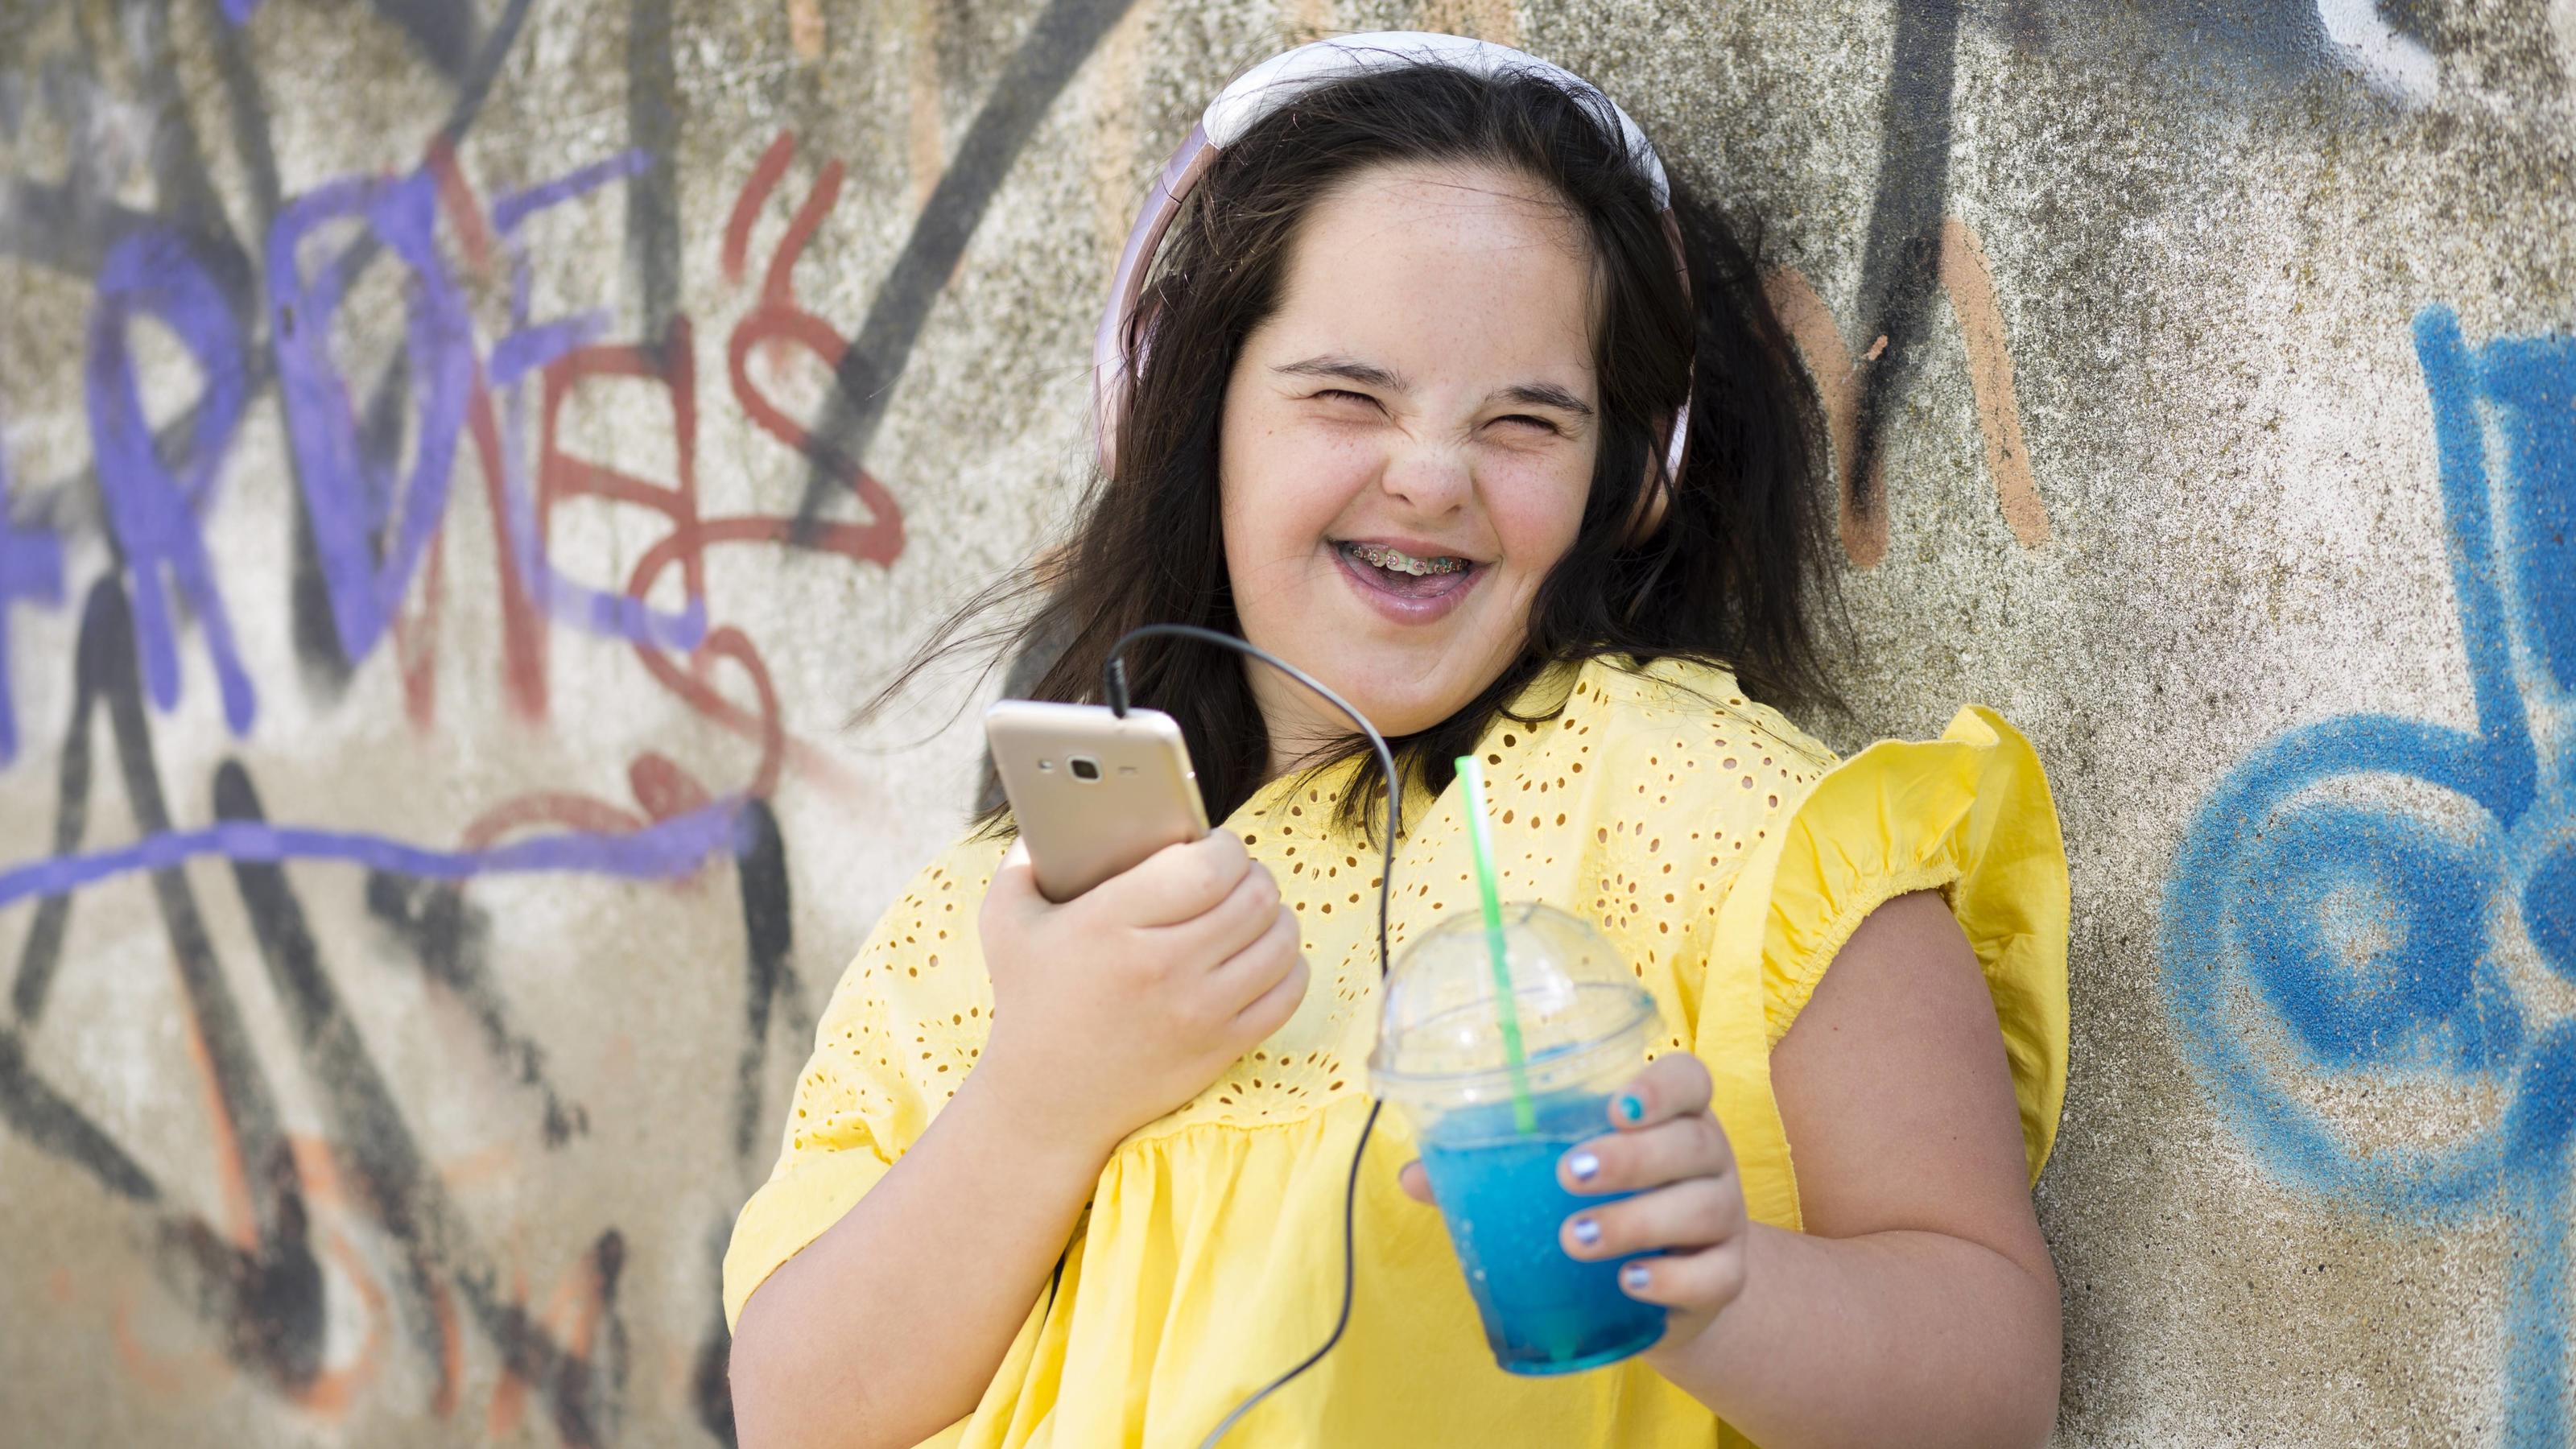 Teenager with down syndrome using smartphone, holding plastic cup model released Symbolfoto PUBLICATIONxINxGERxSUIxAUTxHUNxONLY ERRF00271  